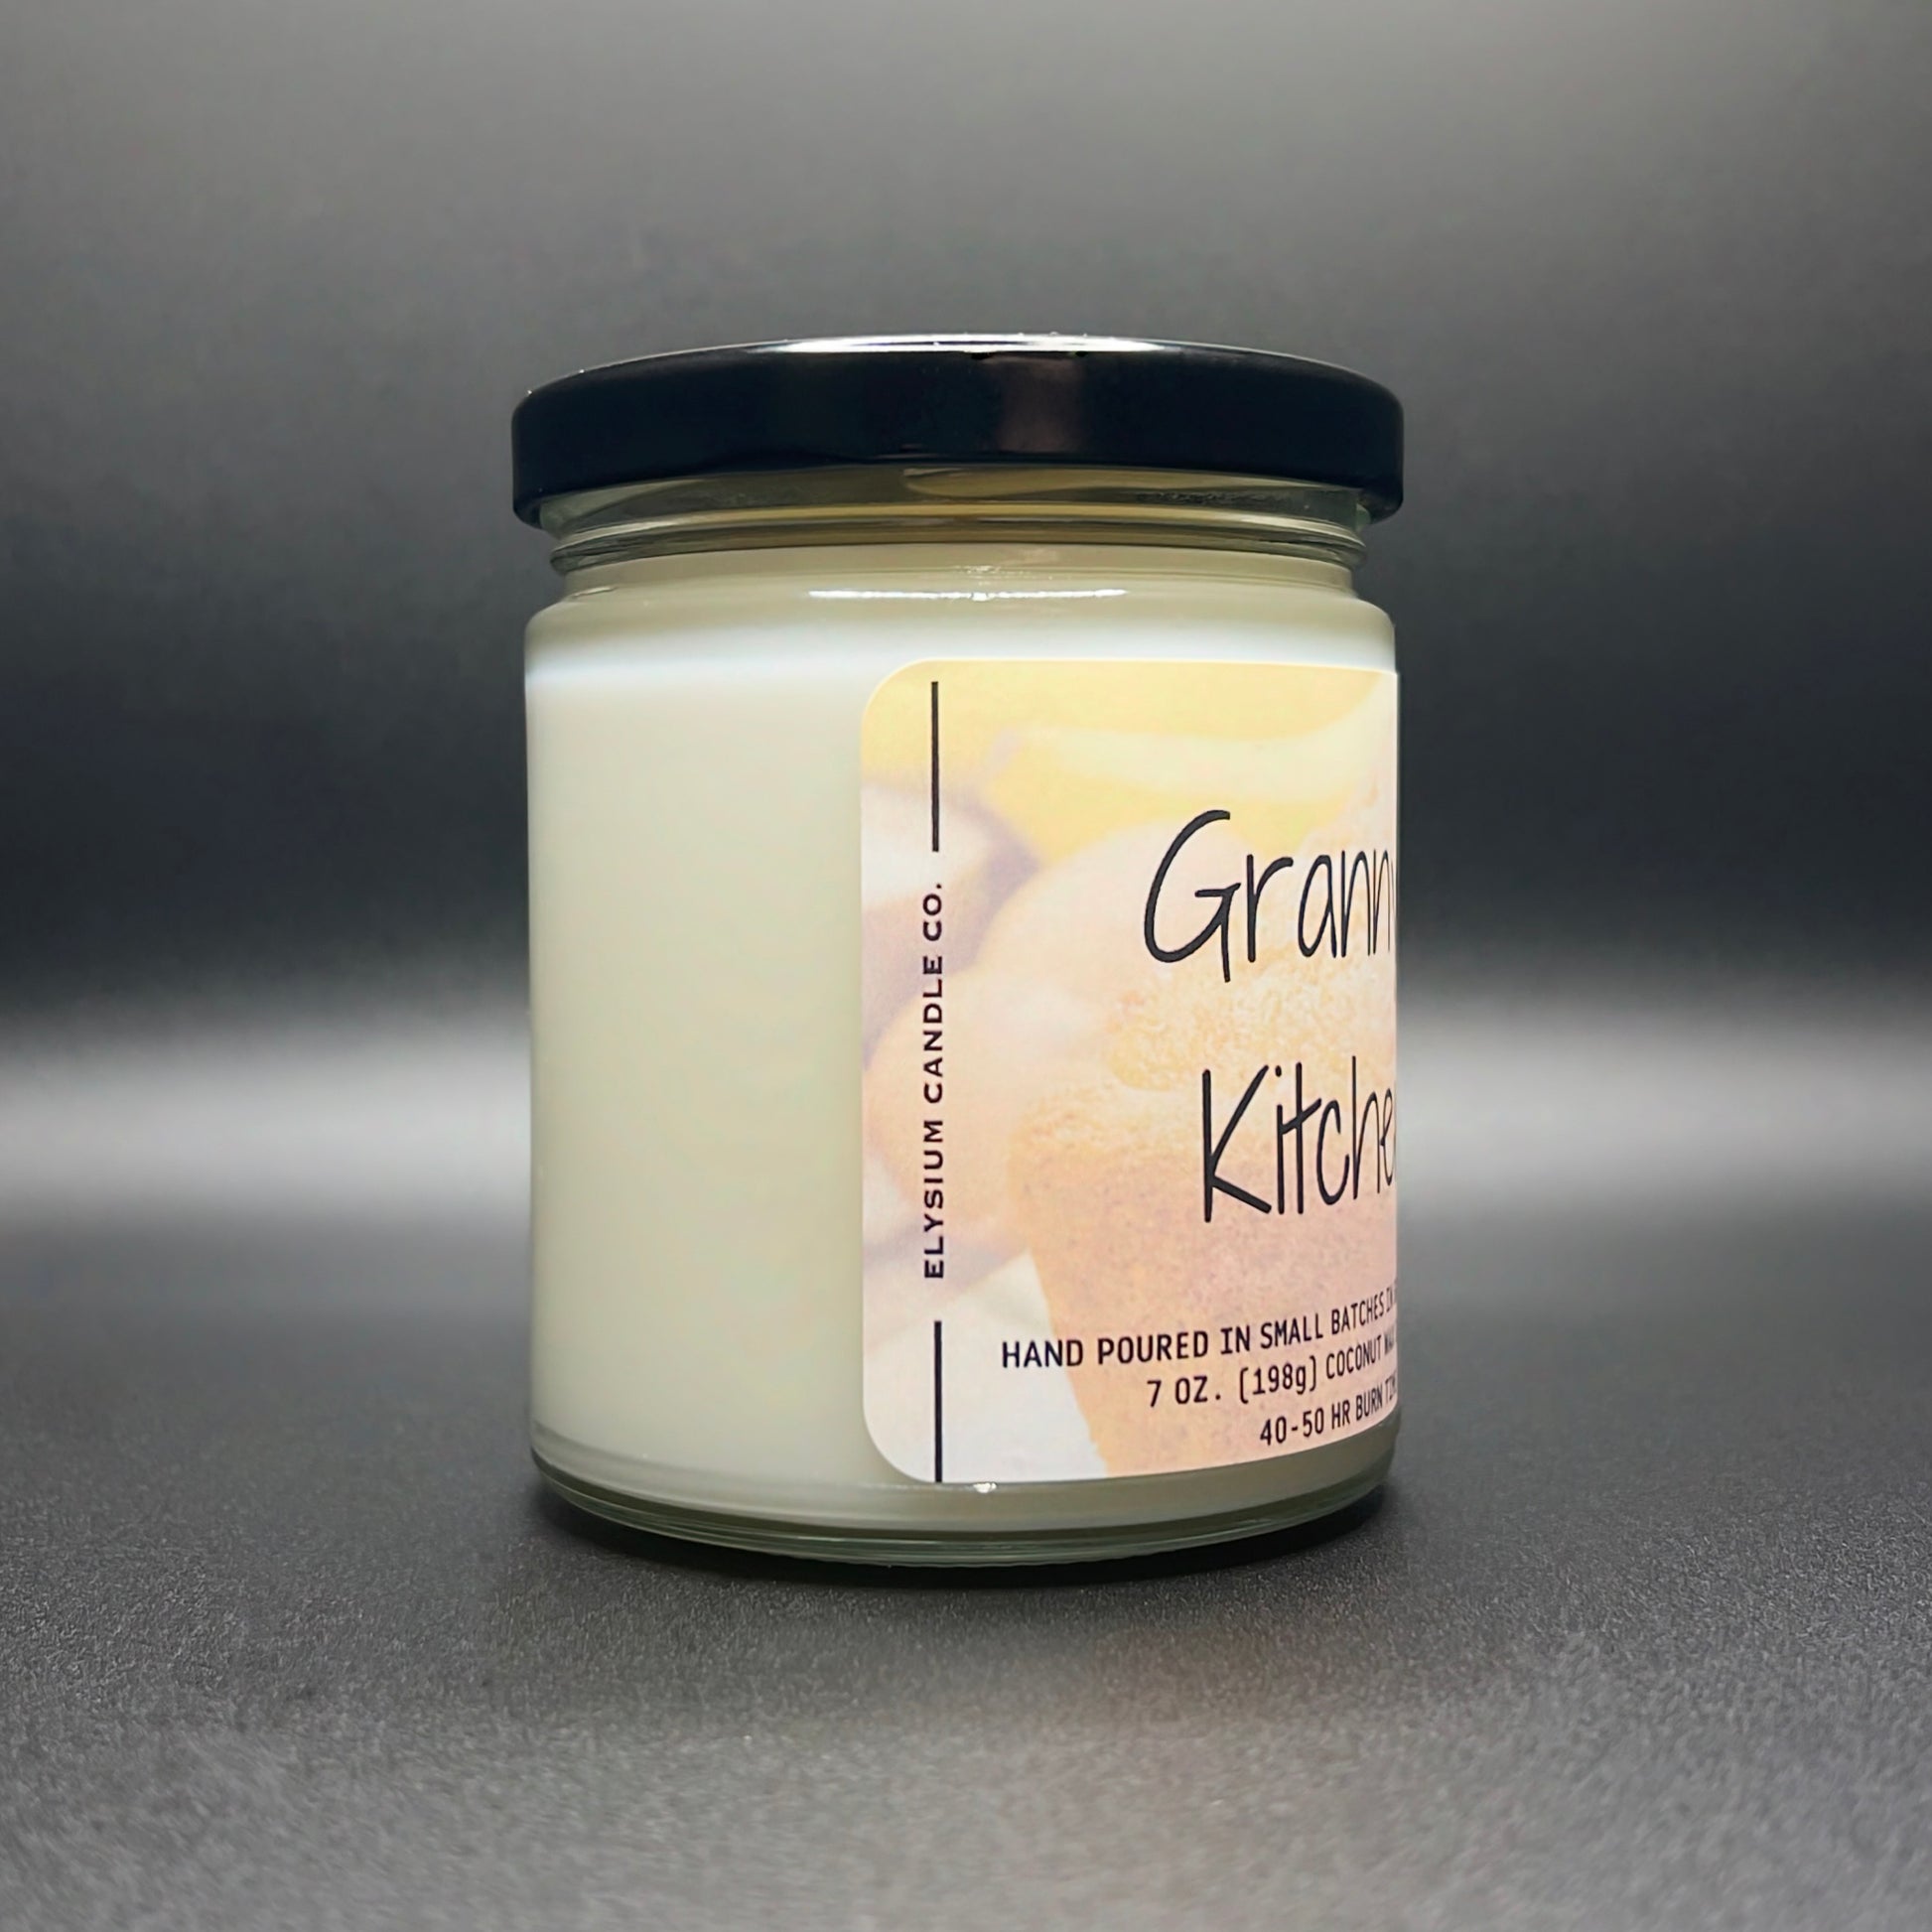 Granny’s Kitchen Candle